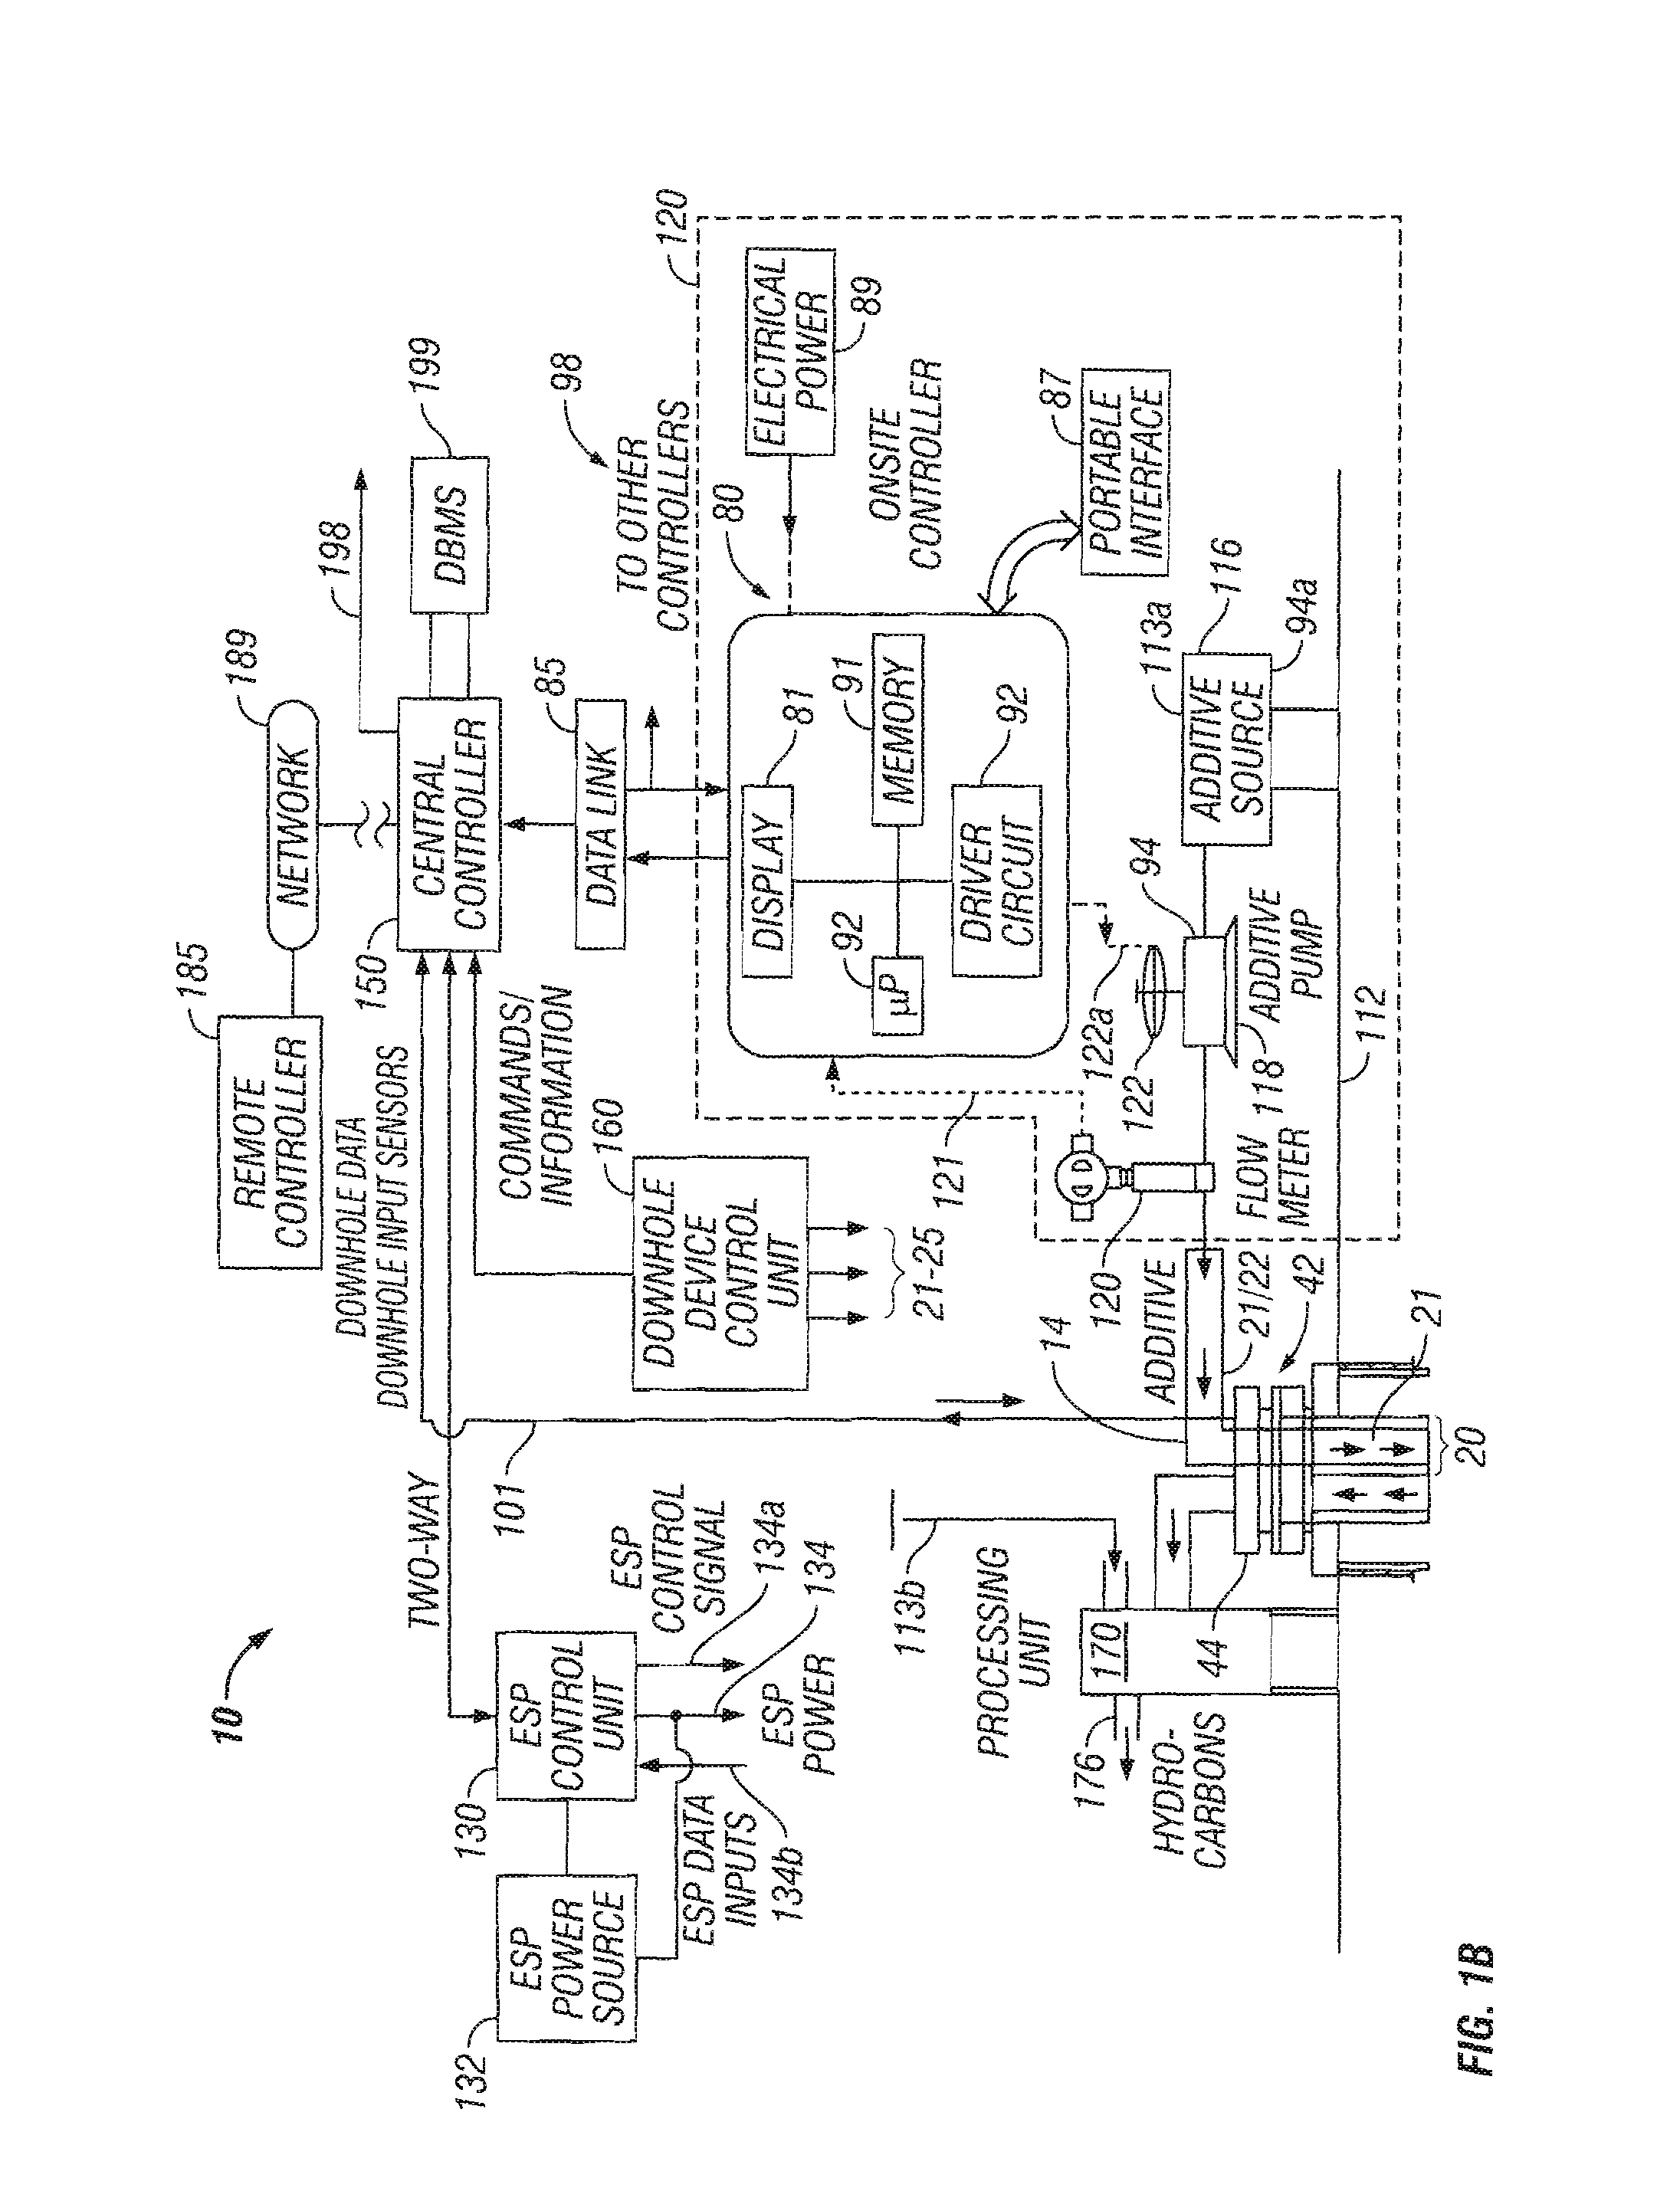 Apparatus and Method for Managing Supply of Additive at Wellsites